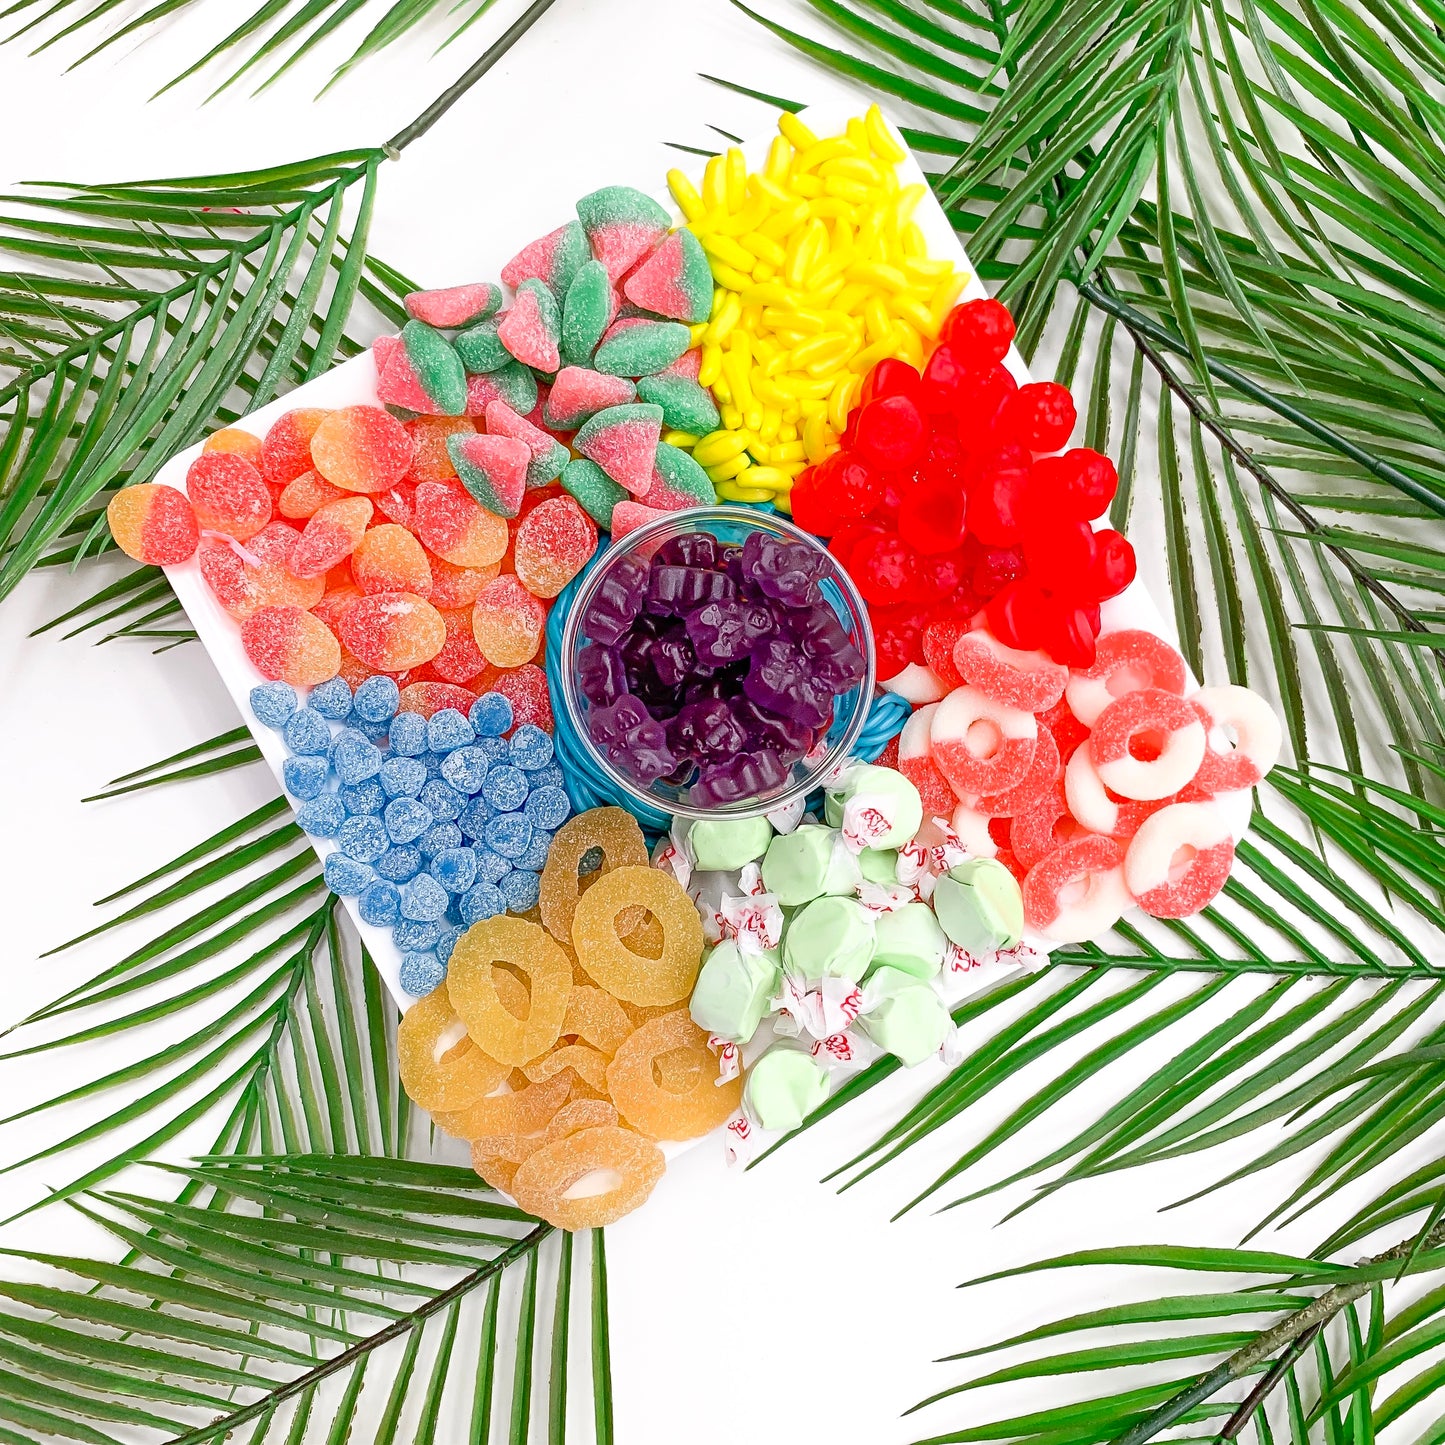 *SUBSCRIPTION* The Candy Club - Monthly Candy Platter Subscription